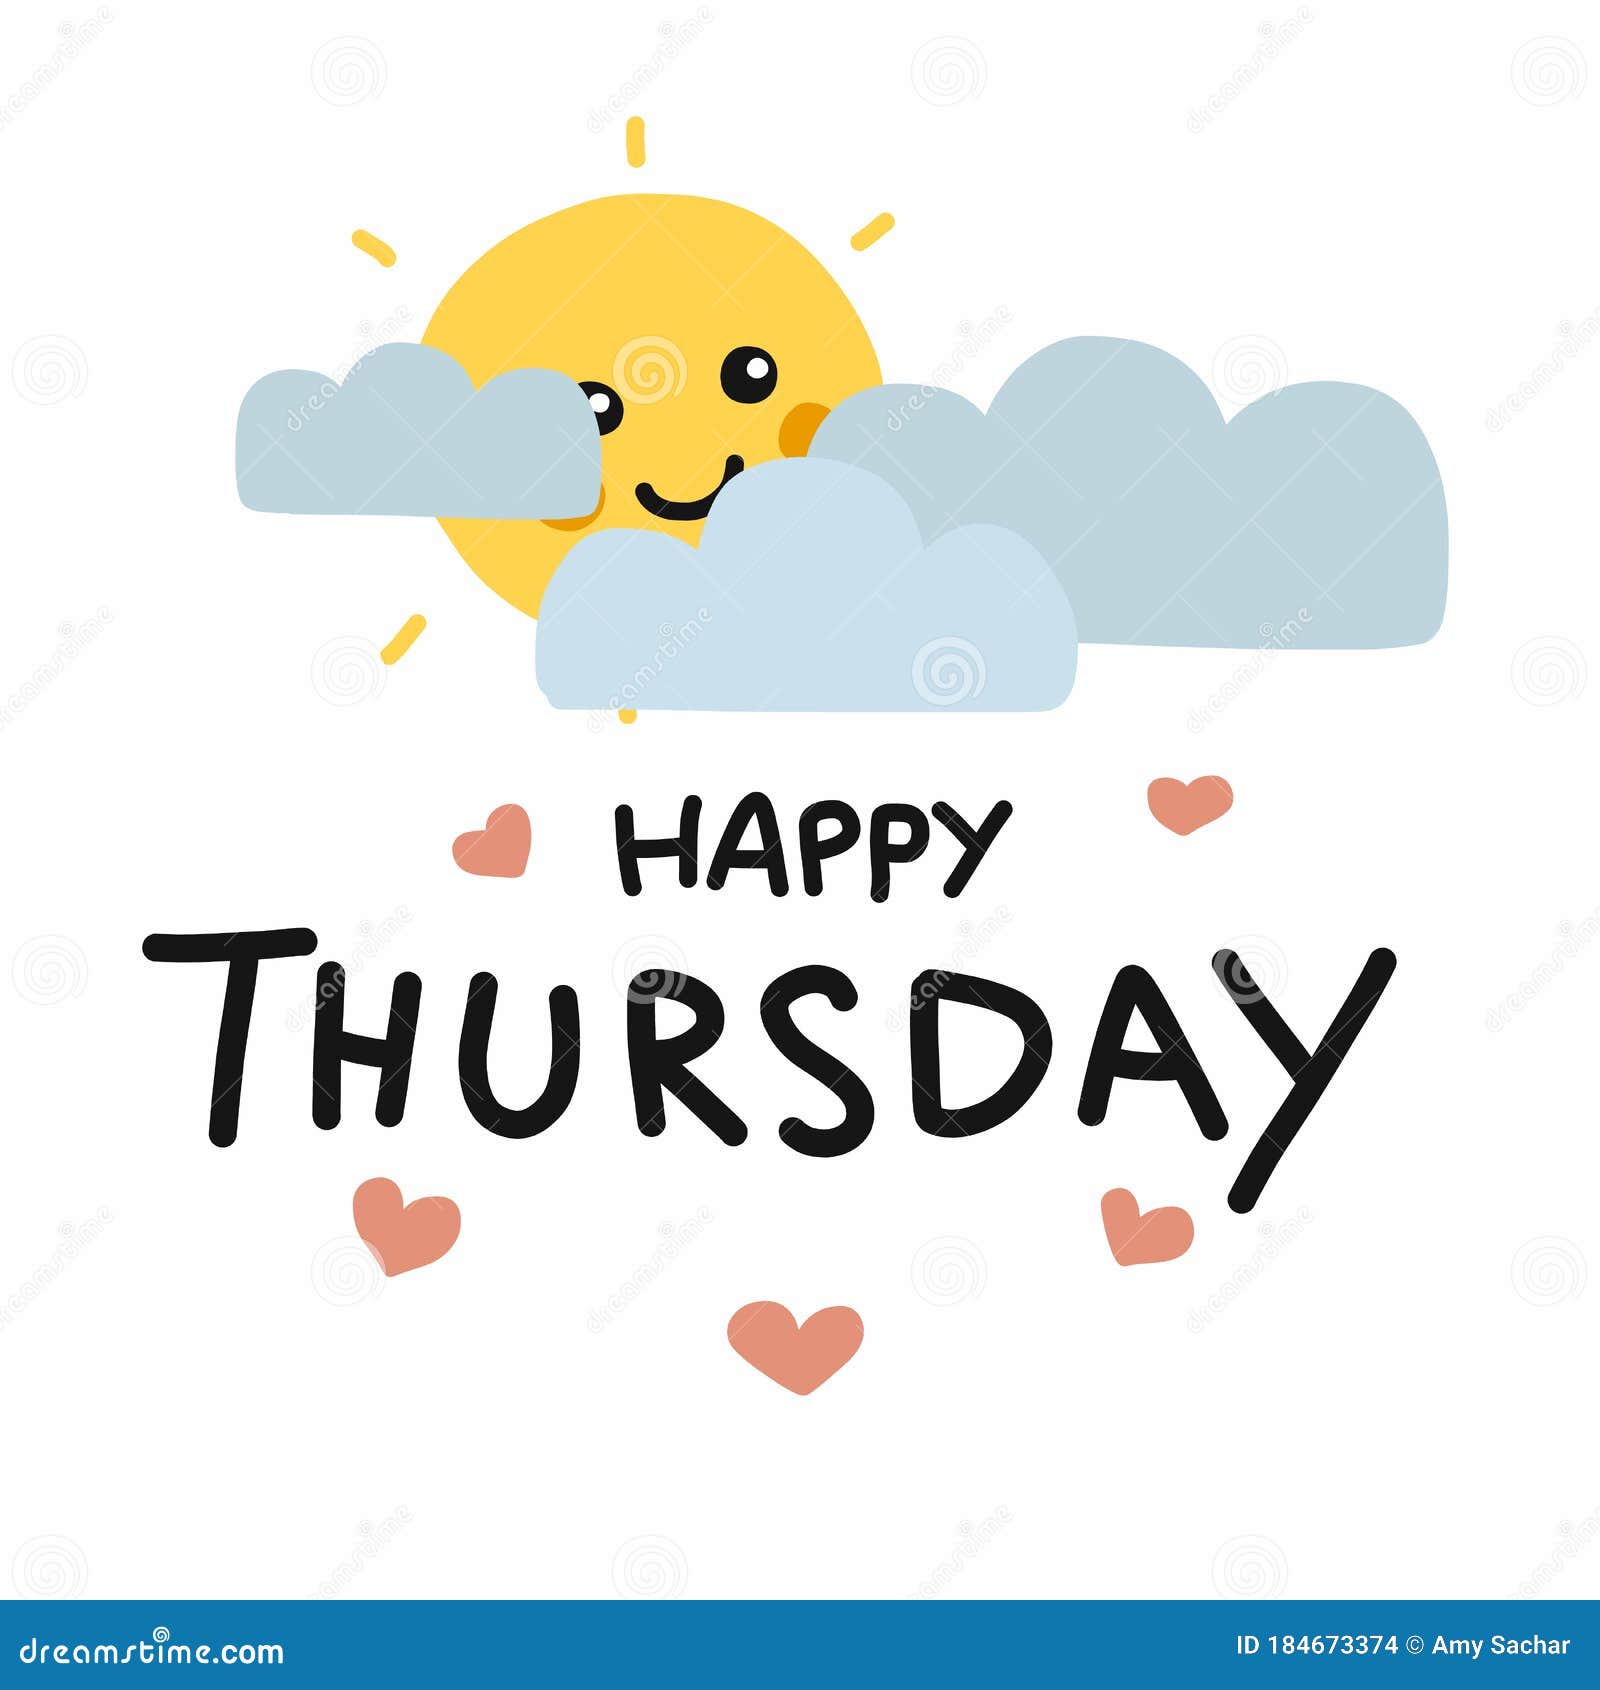 Happy Thursday Cute Sun Smile and Cloud Cartoon Illustration Doodle Style  Stock Vector - Illustration of graphic, good: 184673374